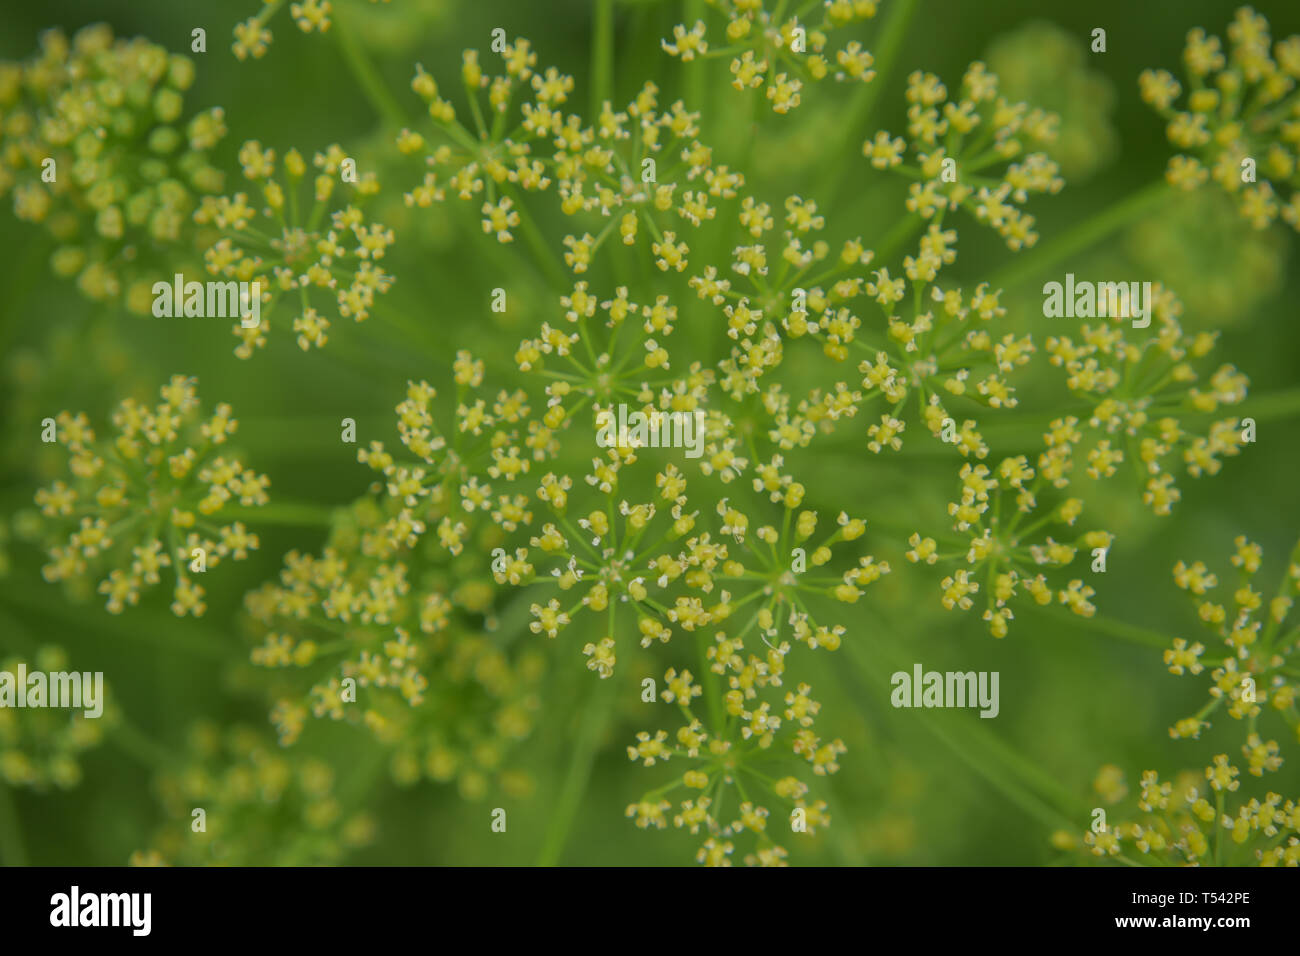 A natural pattern of tiny yellow flowers viewed from above with a bright green bokeh background. Stock Photo